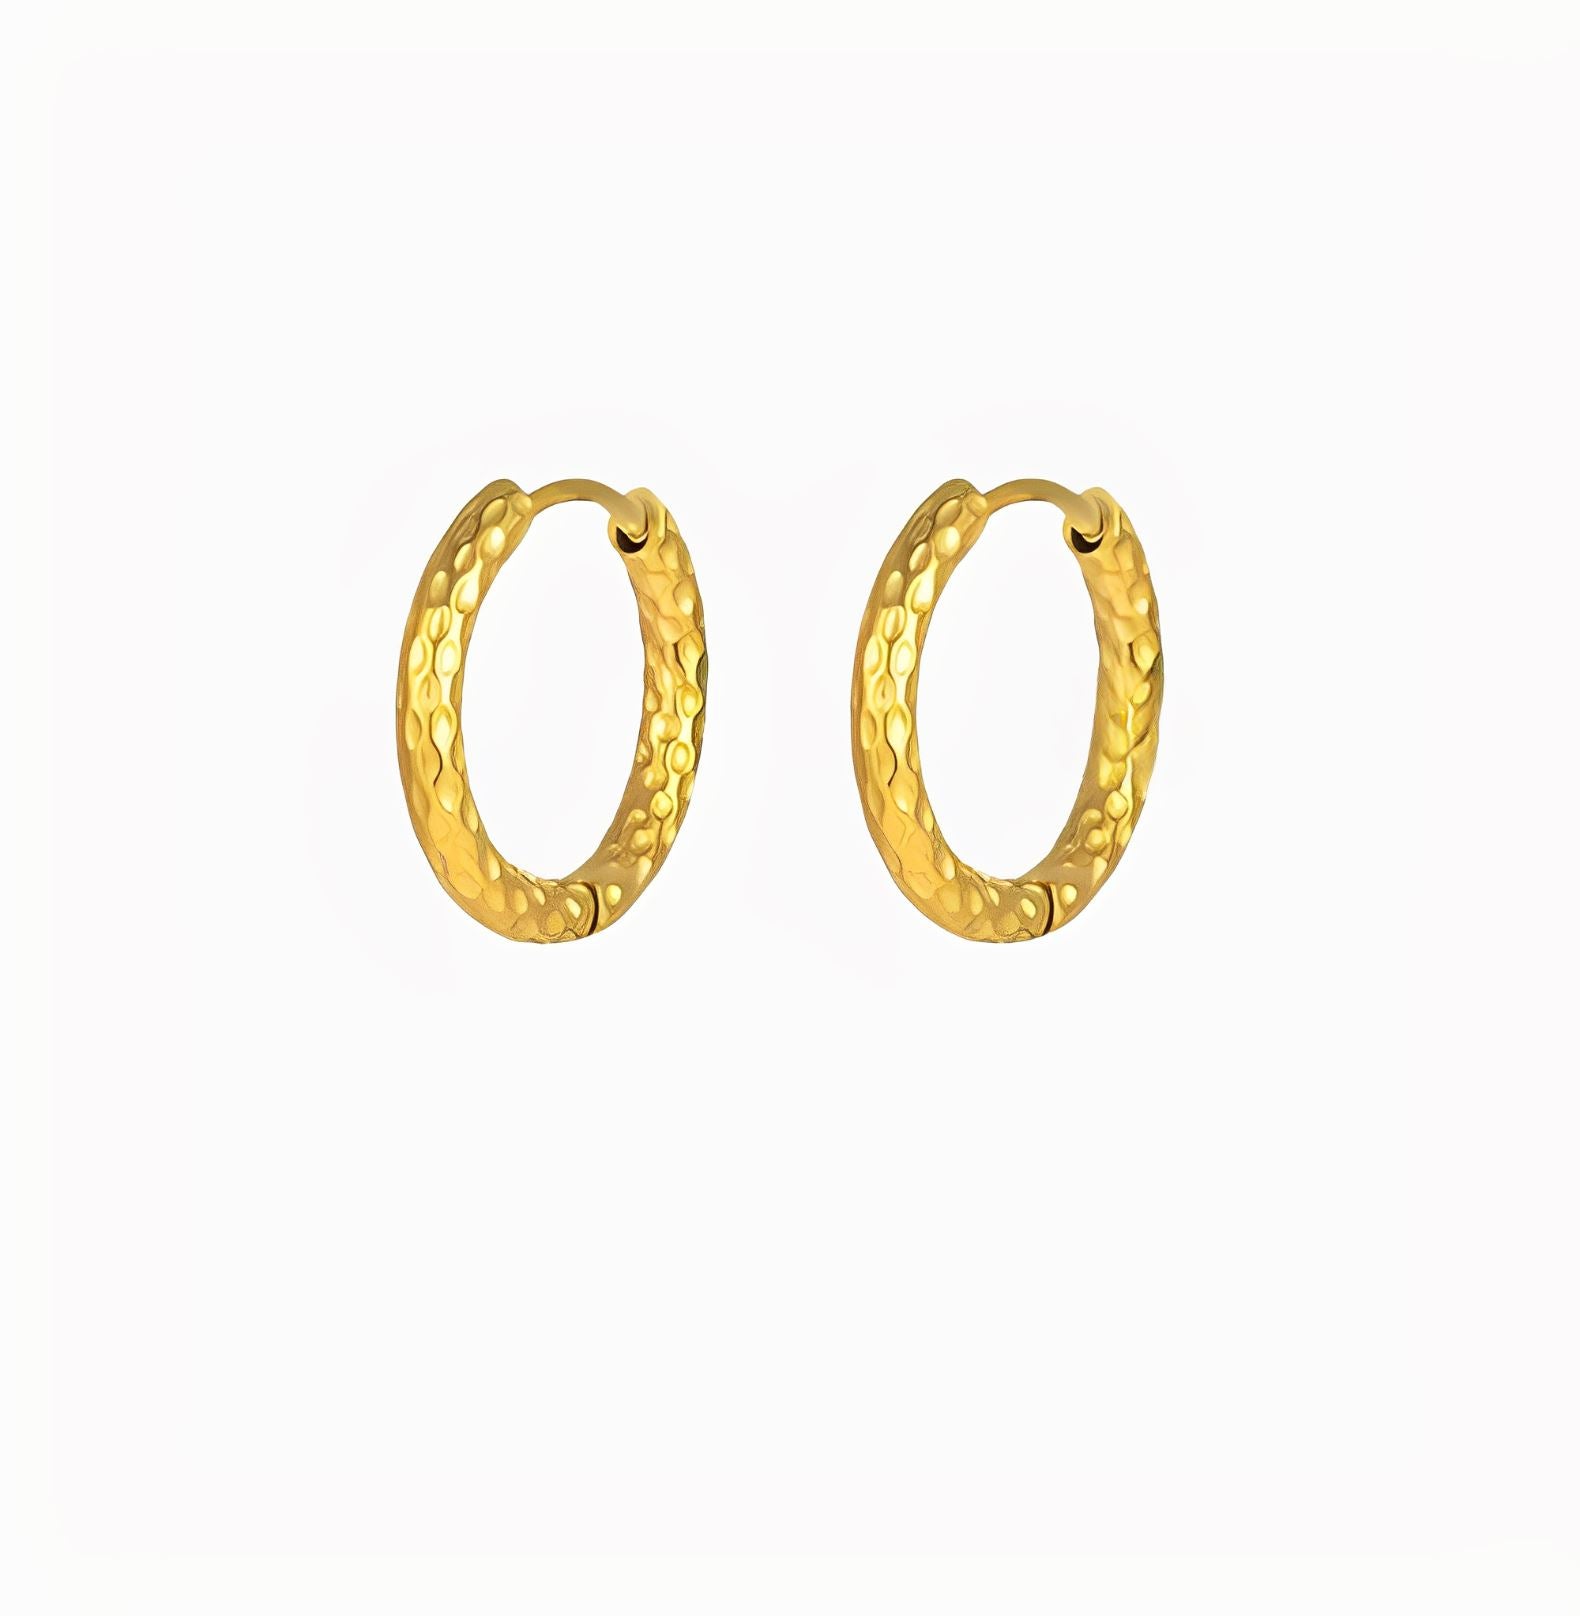 EAR HOOPS EARRINGS braclet Yubama Jewelry Online Store - The Elegant Designs of Gold and Silver ! 